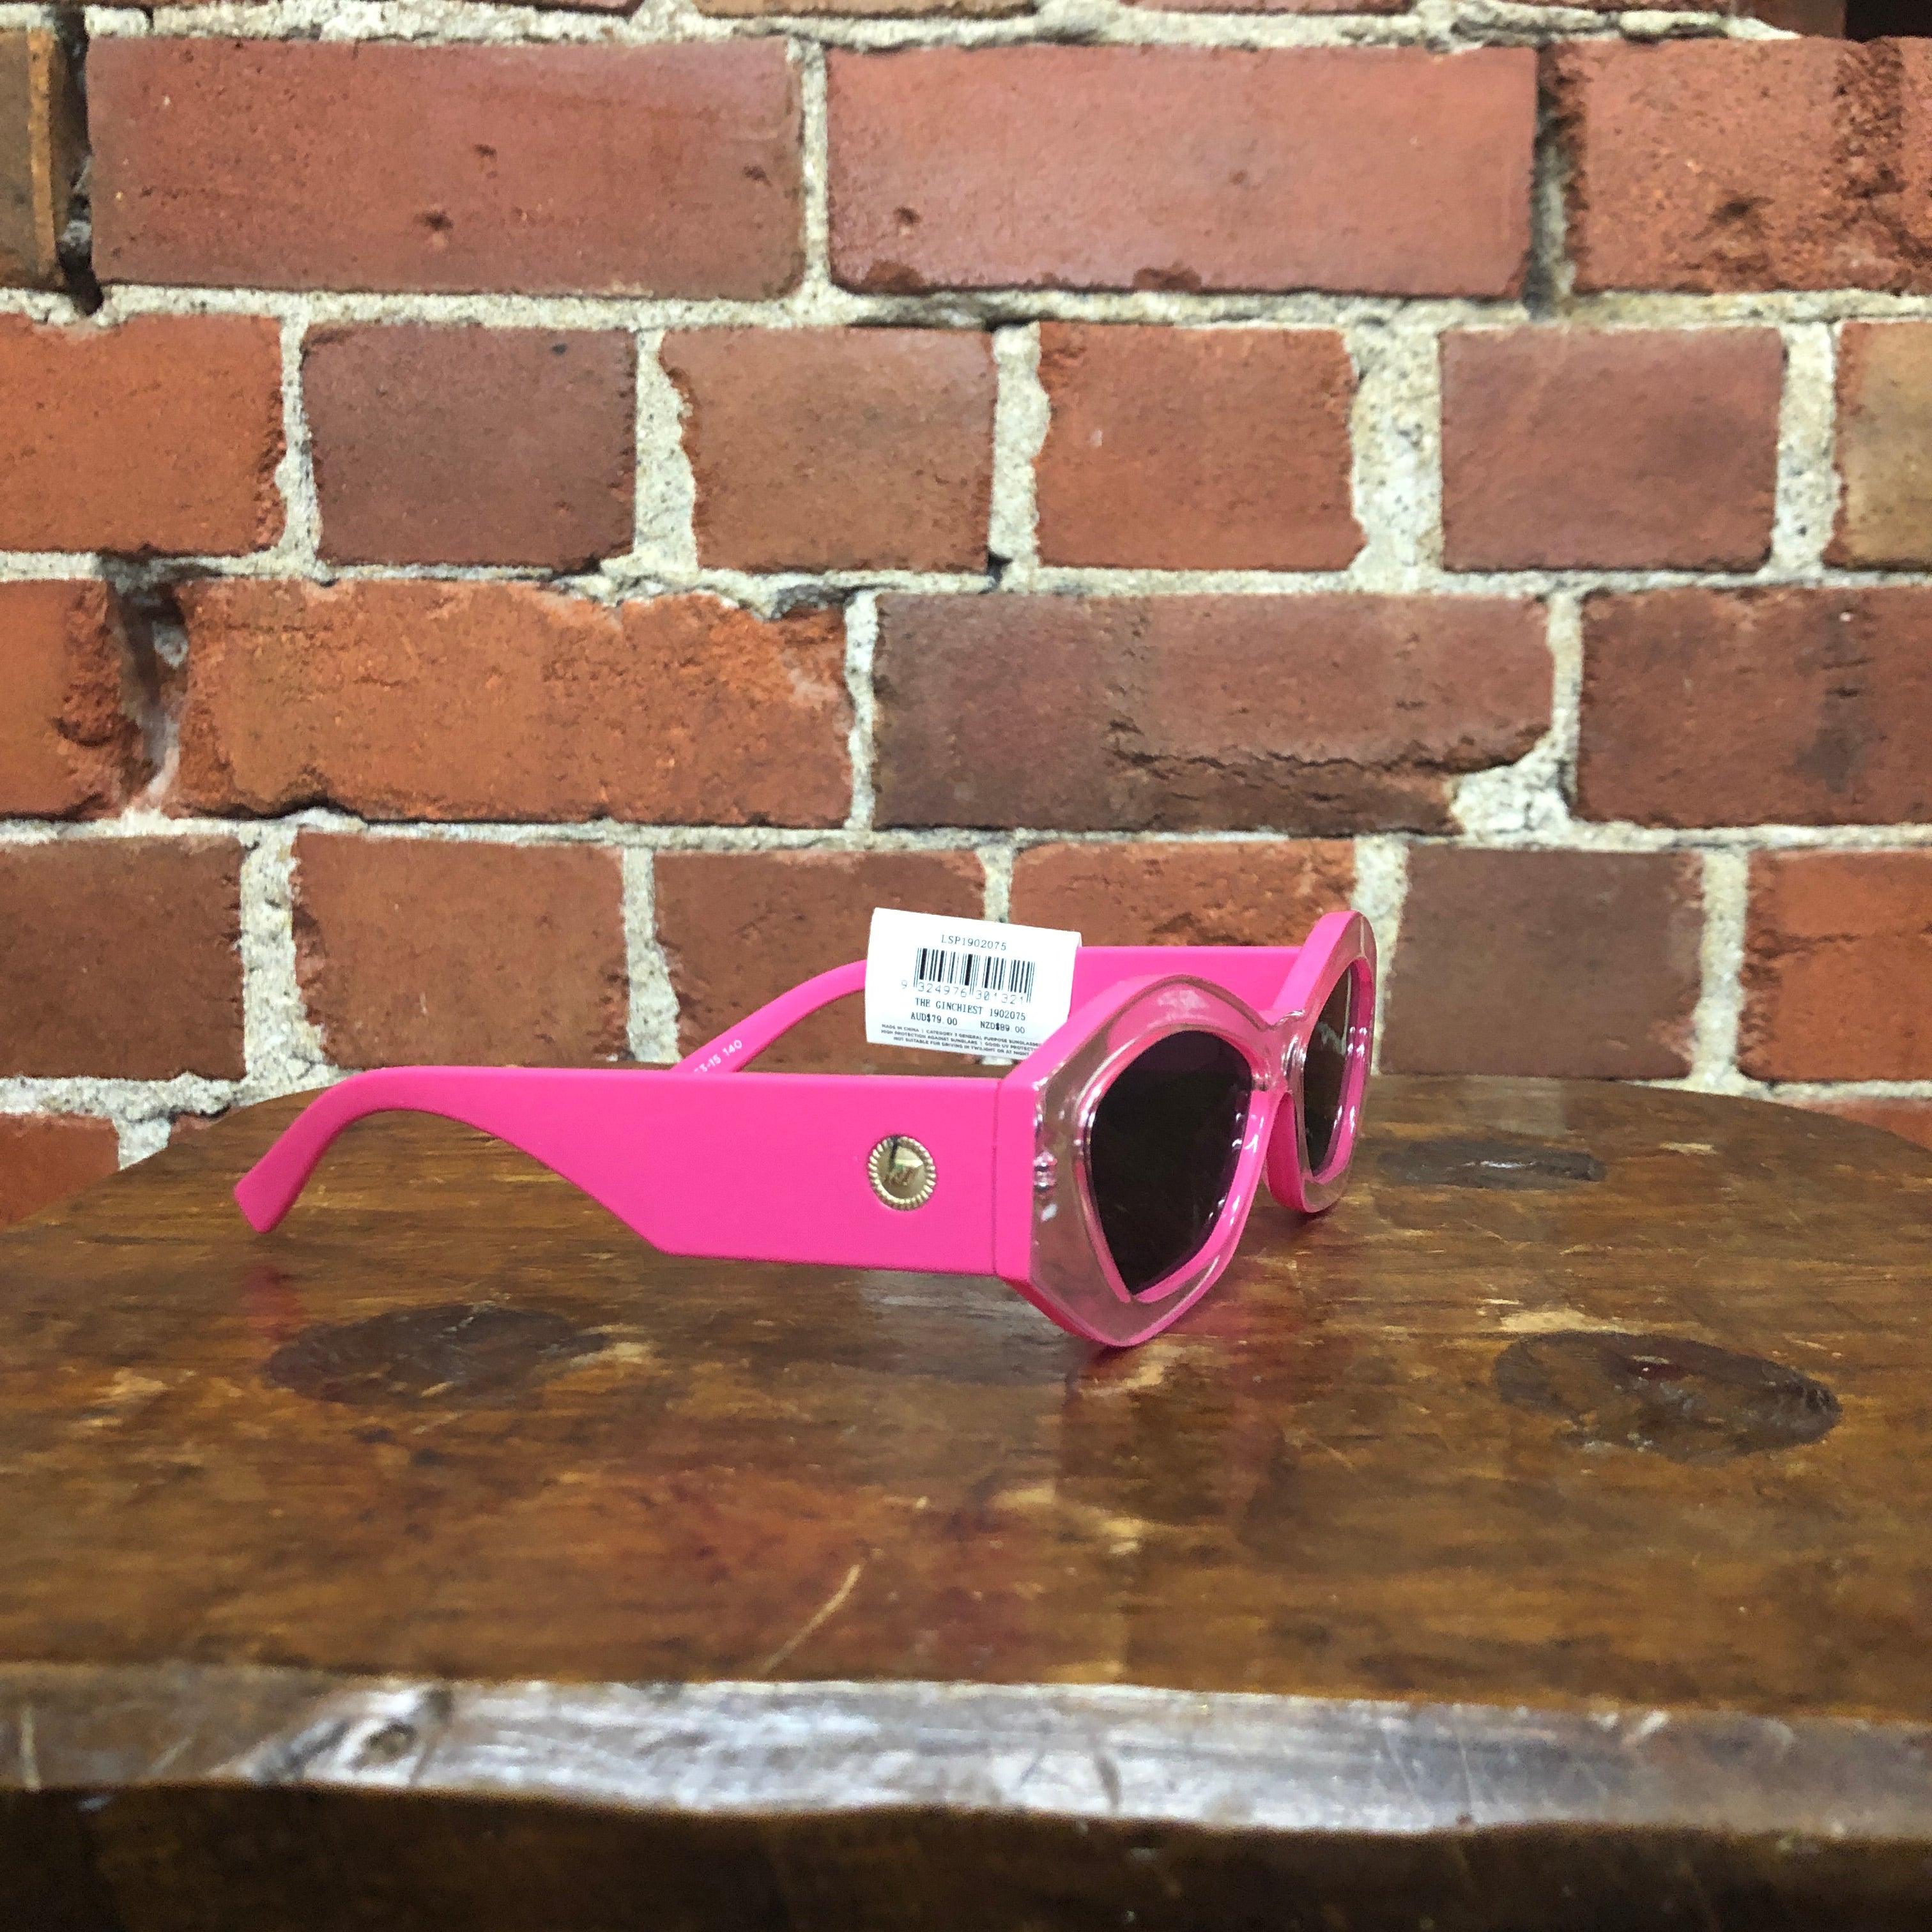 LE SPECS GINSCHET sunglasses PINK/CLEAR